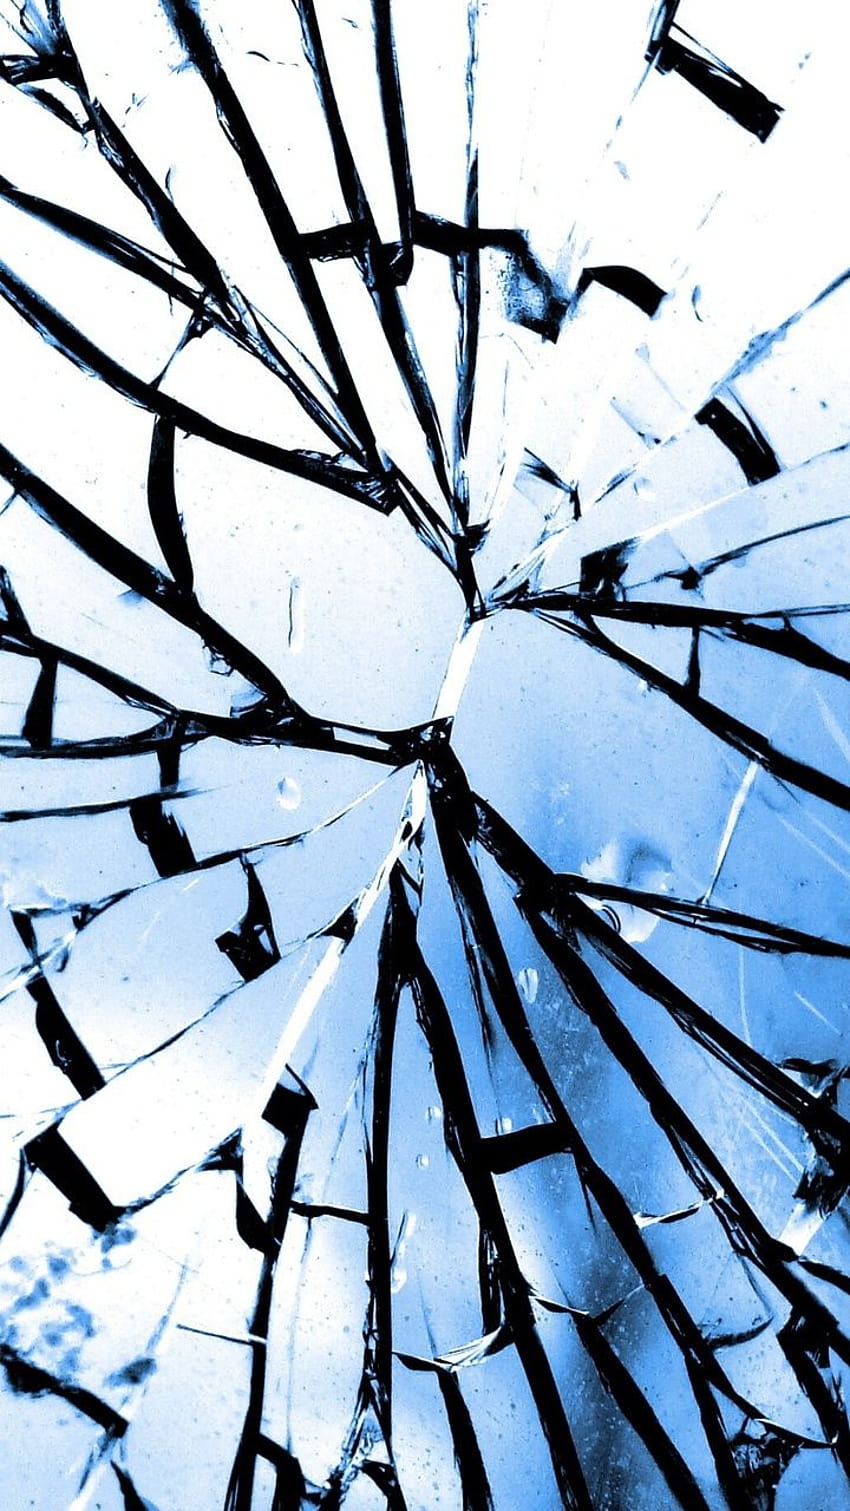 720x1280 Glass Crack Broken Glass Moto G,X Xperia Z1,Z3 Compact,Galaxy S3,Note II,Nexus , Backgrounds, and, ガラスクラック 3D HD電話の壁紙